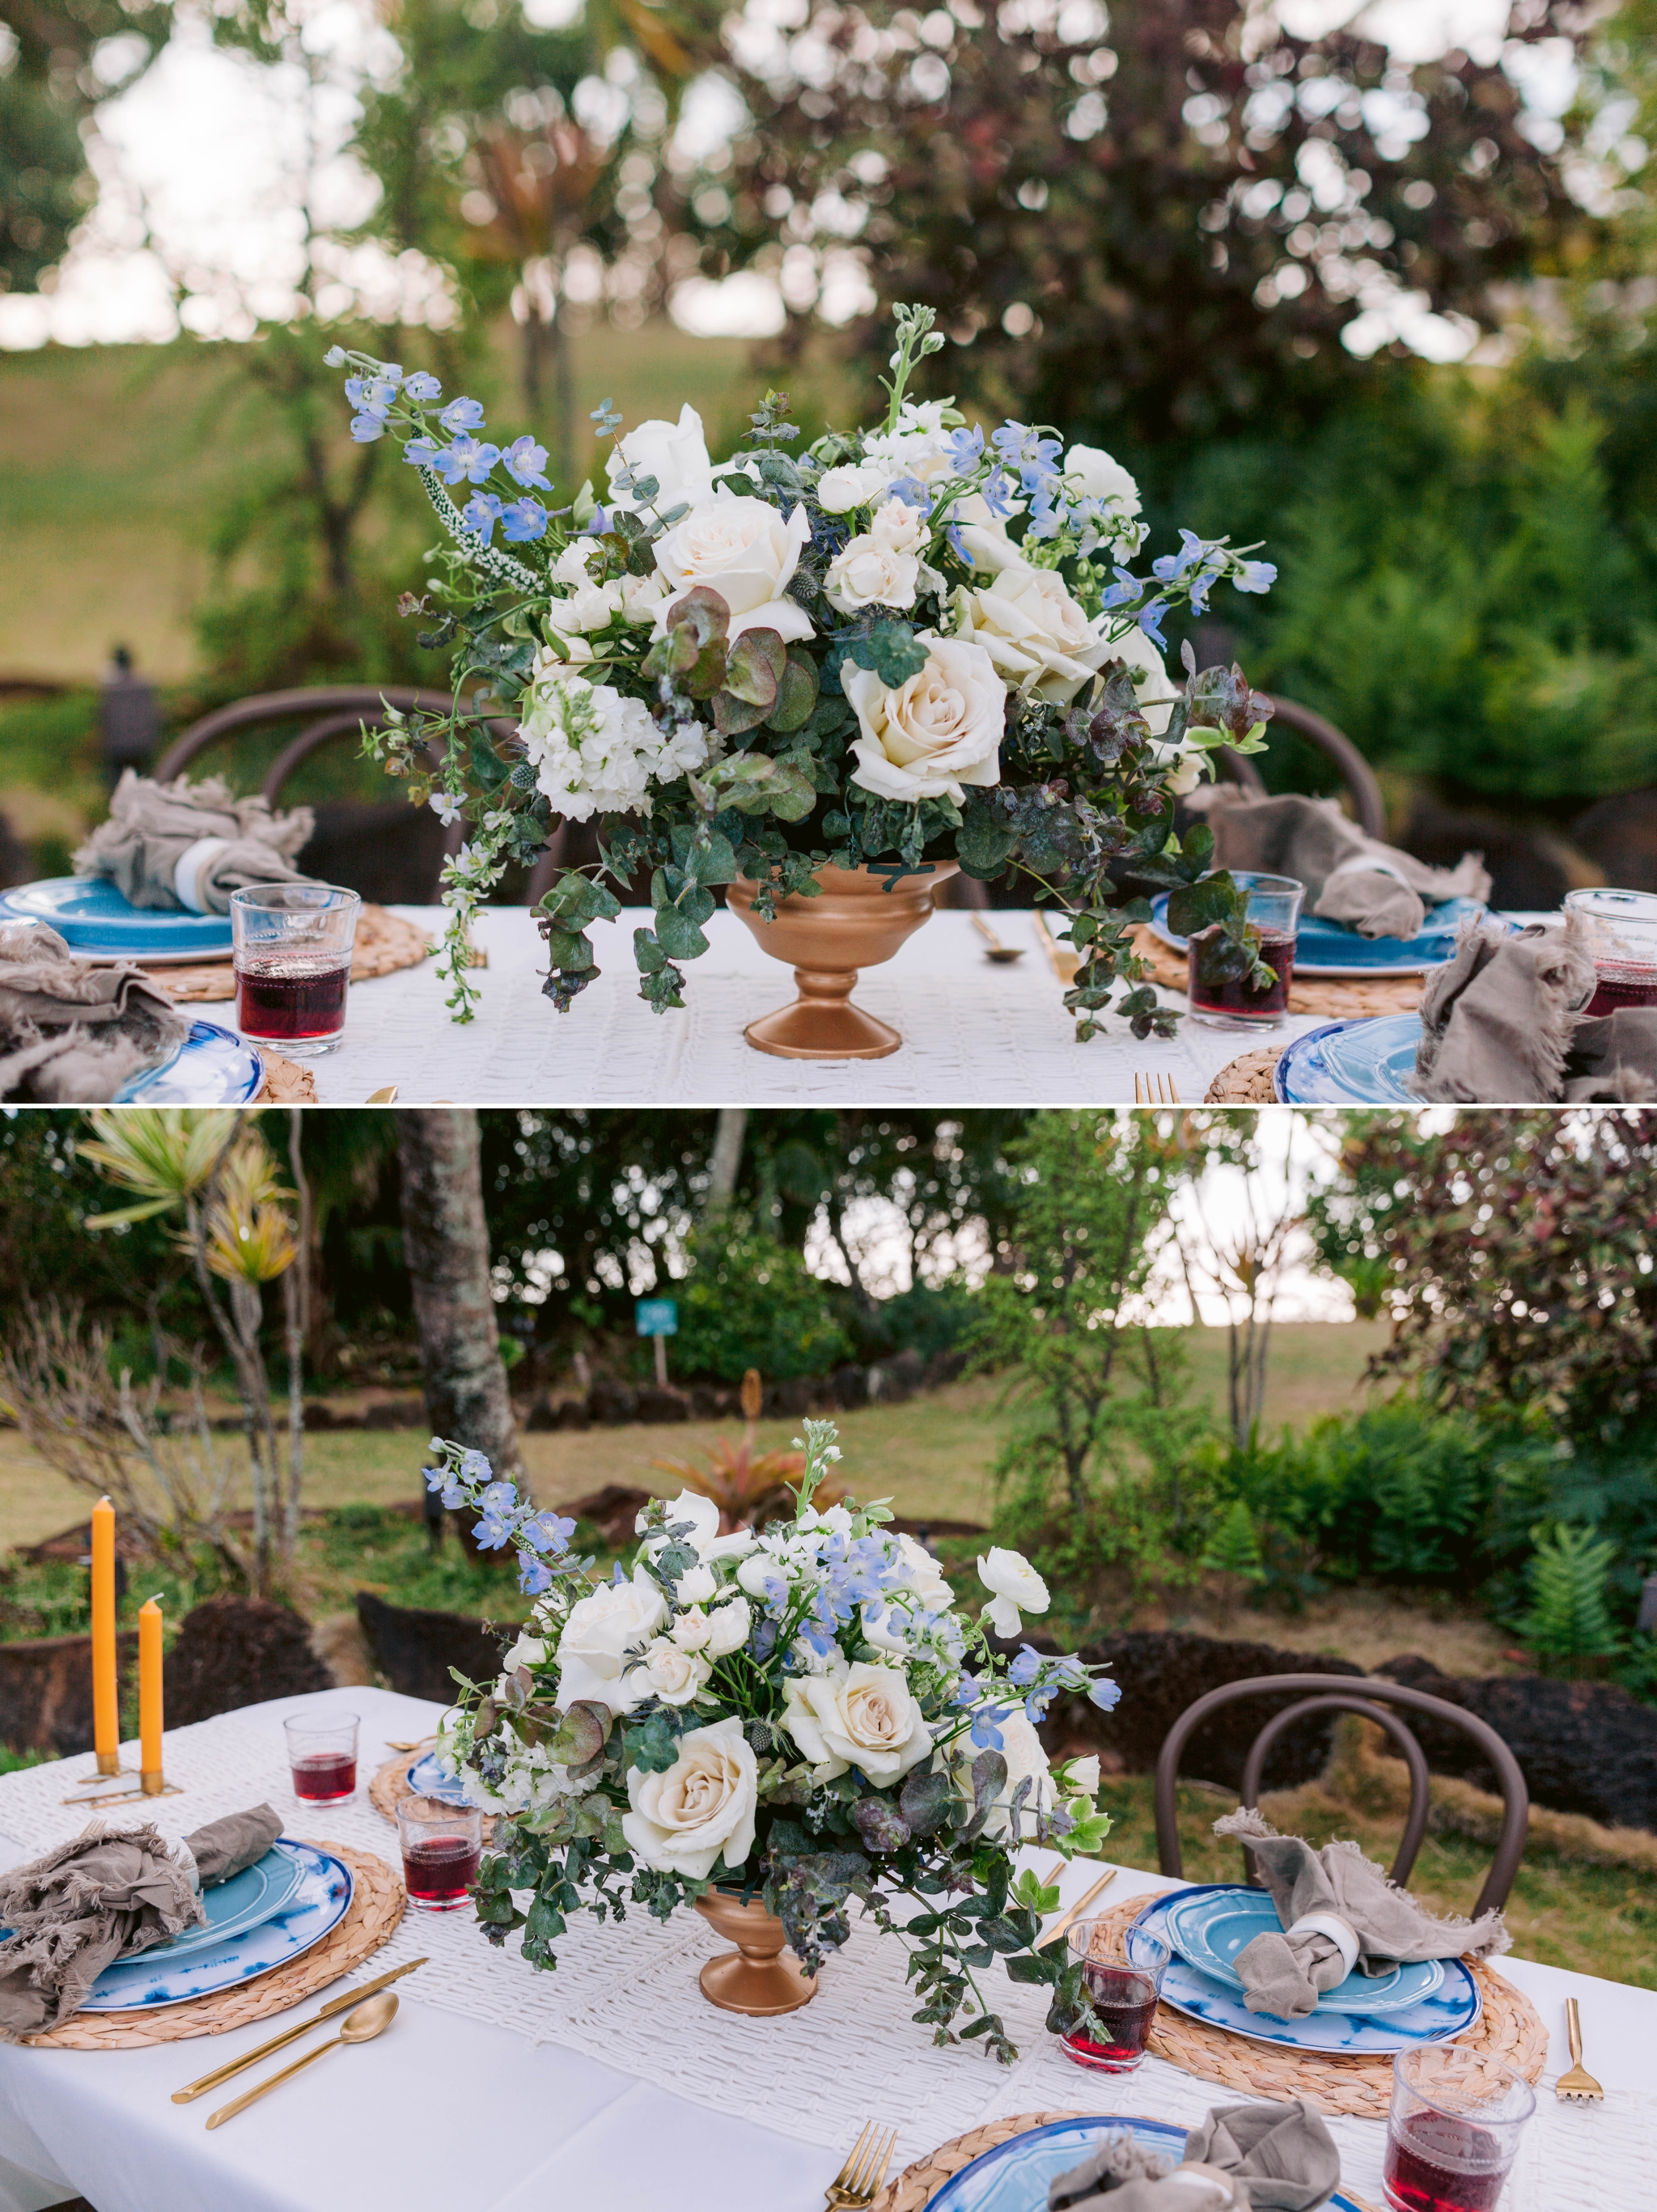 Large Flower Centerpiece with blue, gold and green accents - Ana + Elijah - Wedding at Loulu Palm in Haleiwa, HI - Oahu Hawaii Wedding Photographer 